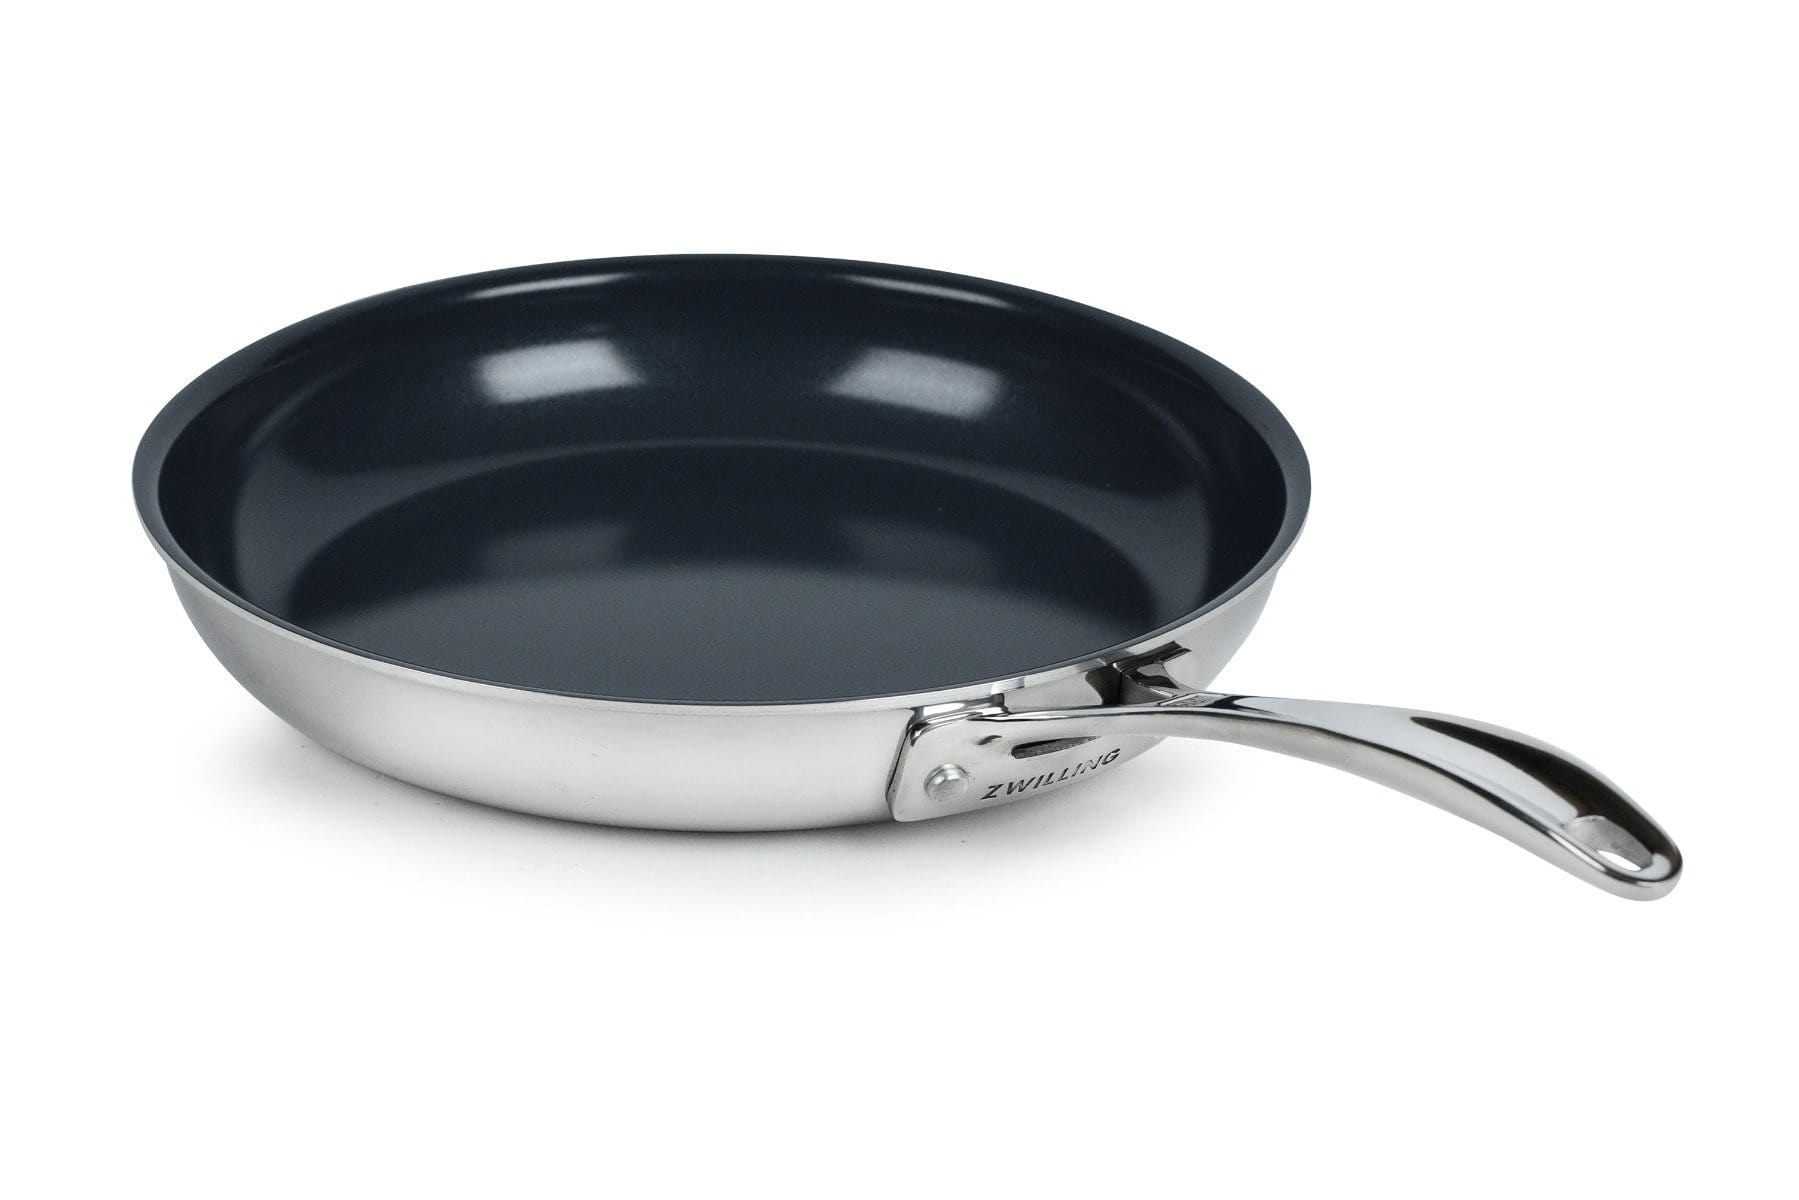 Zwilling Clad CFX 12-Inch, Ceramic, Non-Stick, Stainless Steel Fry Pan